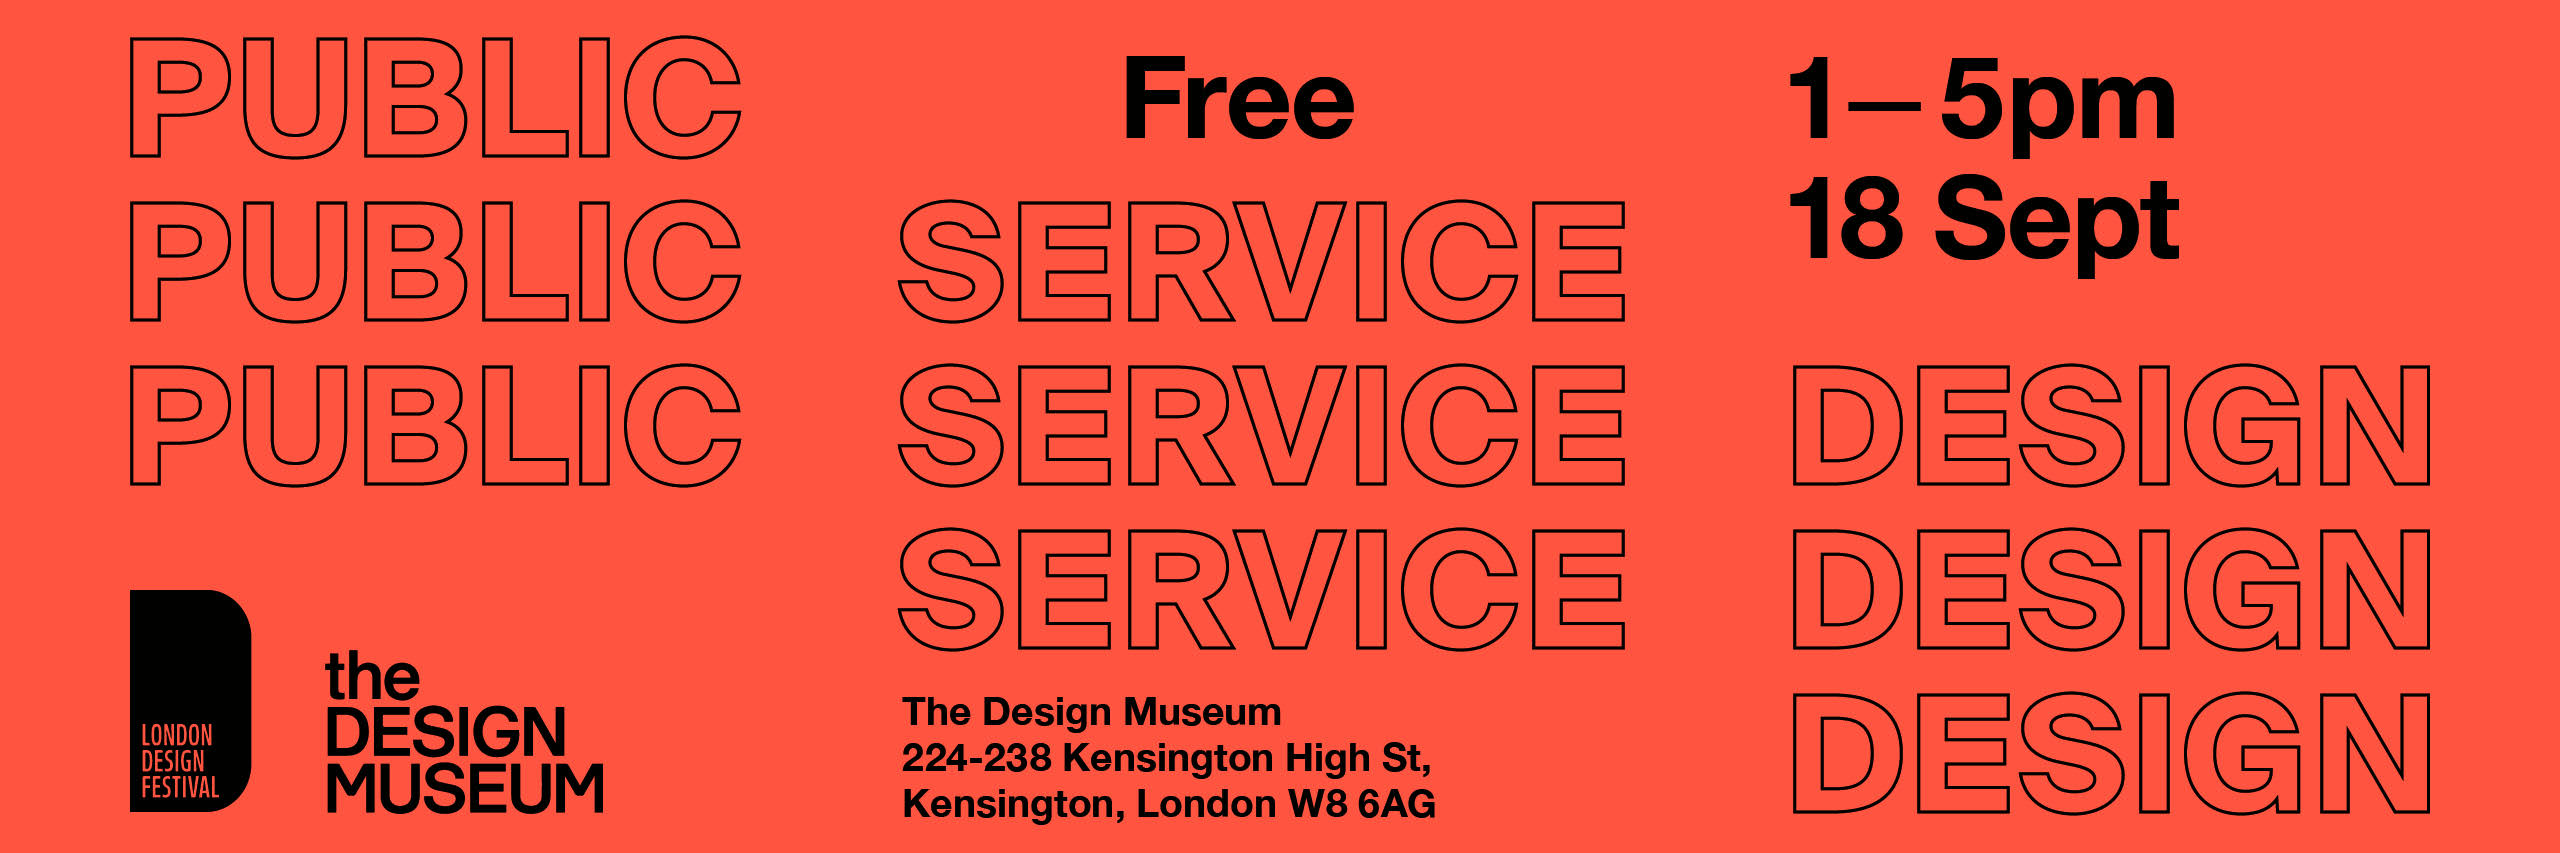 Poster advertising the Cross-Government Design Meetup at the Design Museum